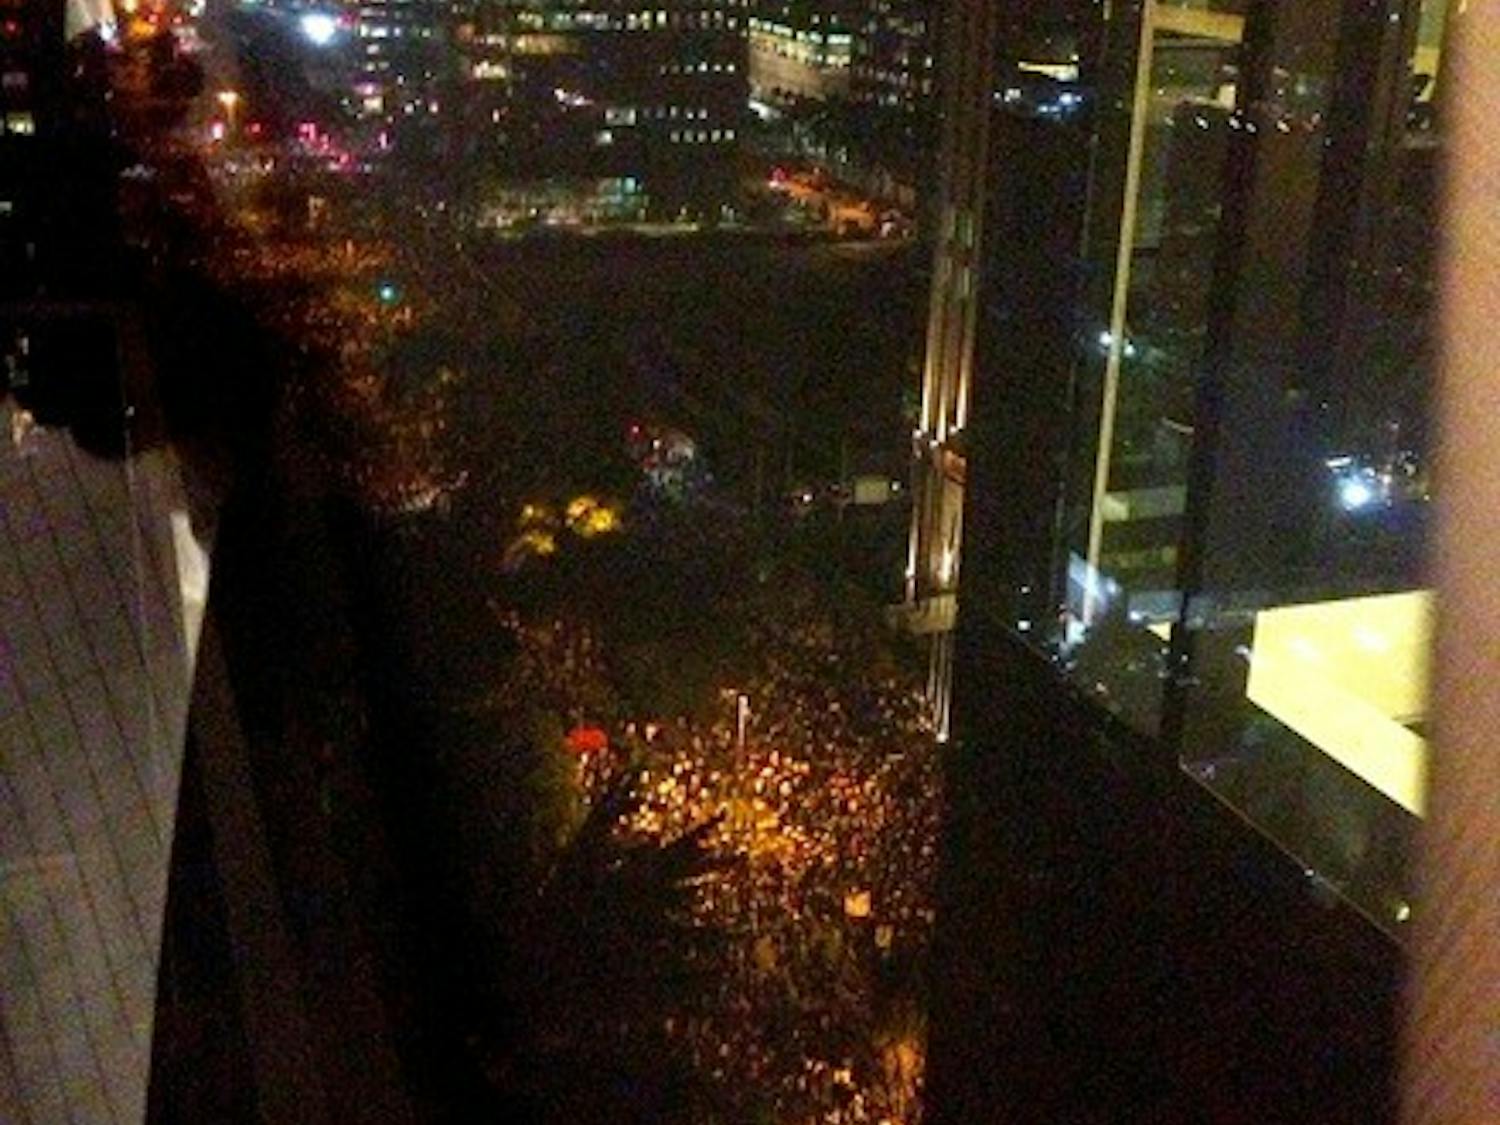 Yamamura watched as 65,000 protestors marched below his window in Sao Paulo, Brazil.